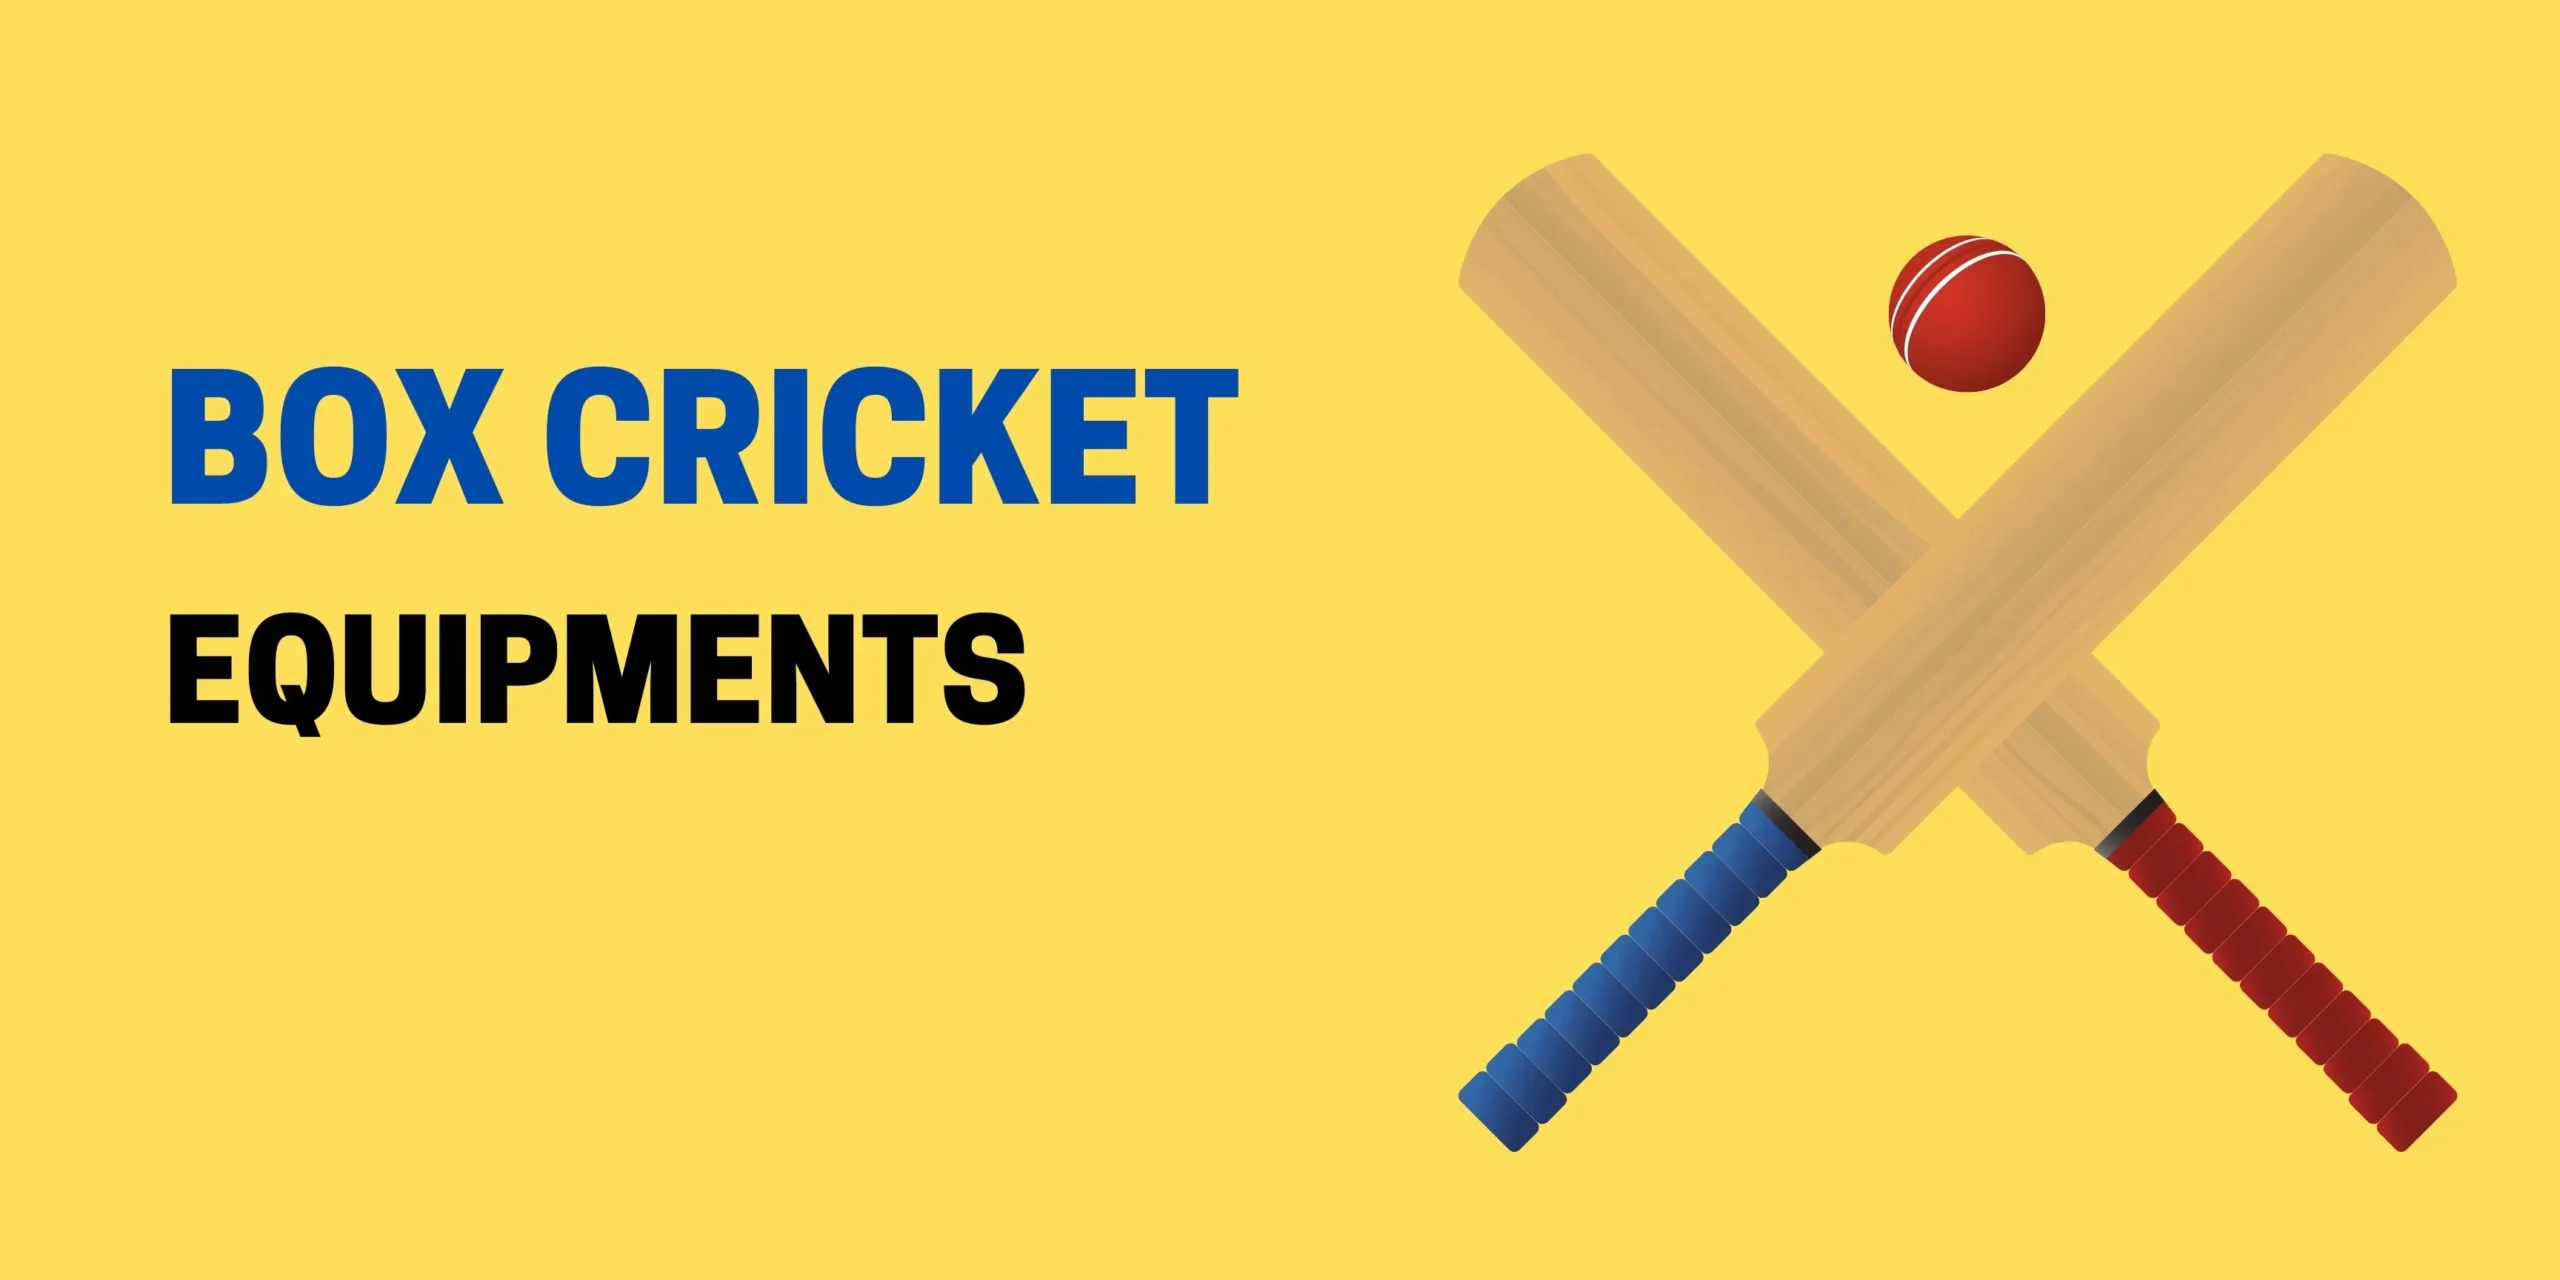 box cricket rules and strategy